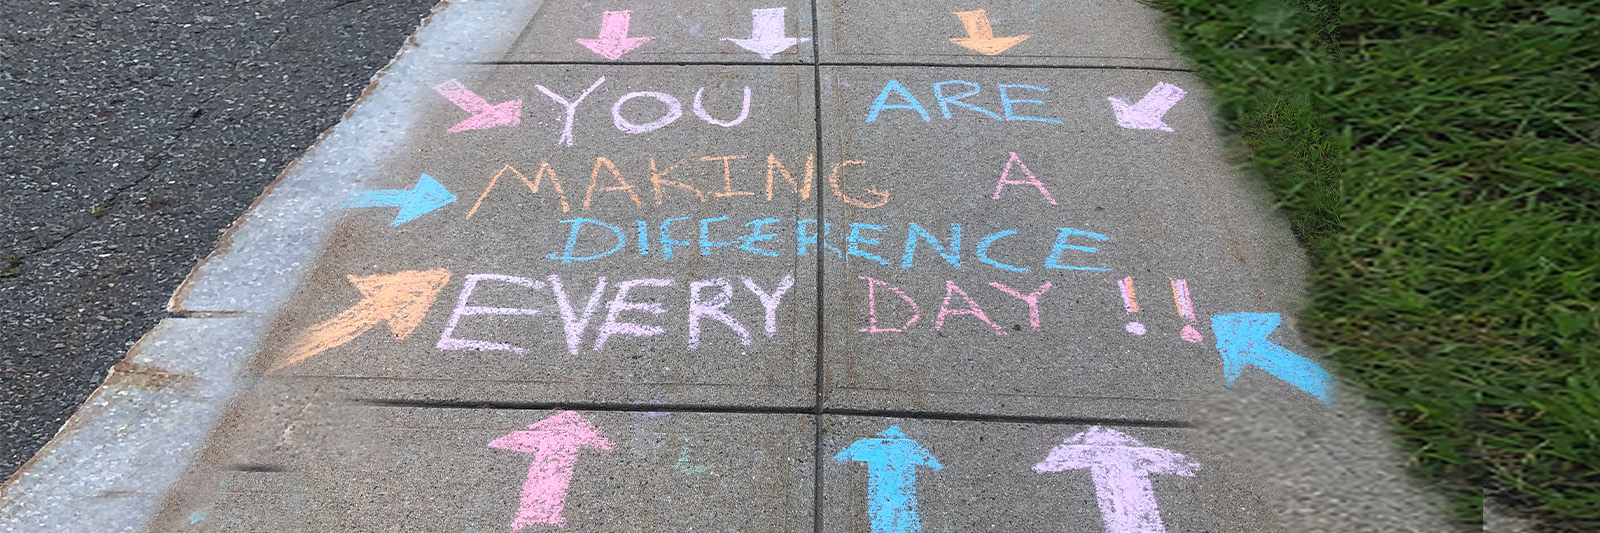 "You are making a difference every day" chalk message